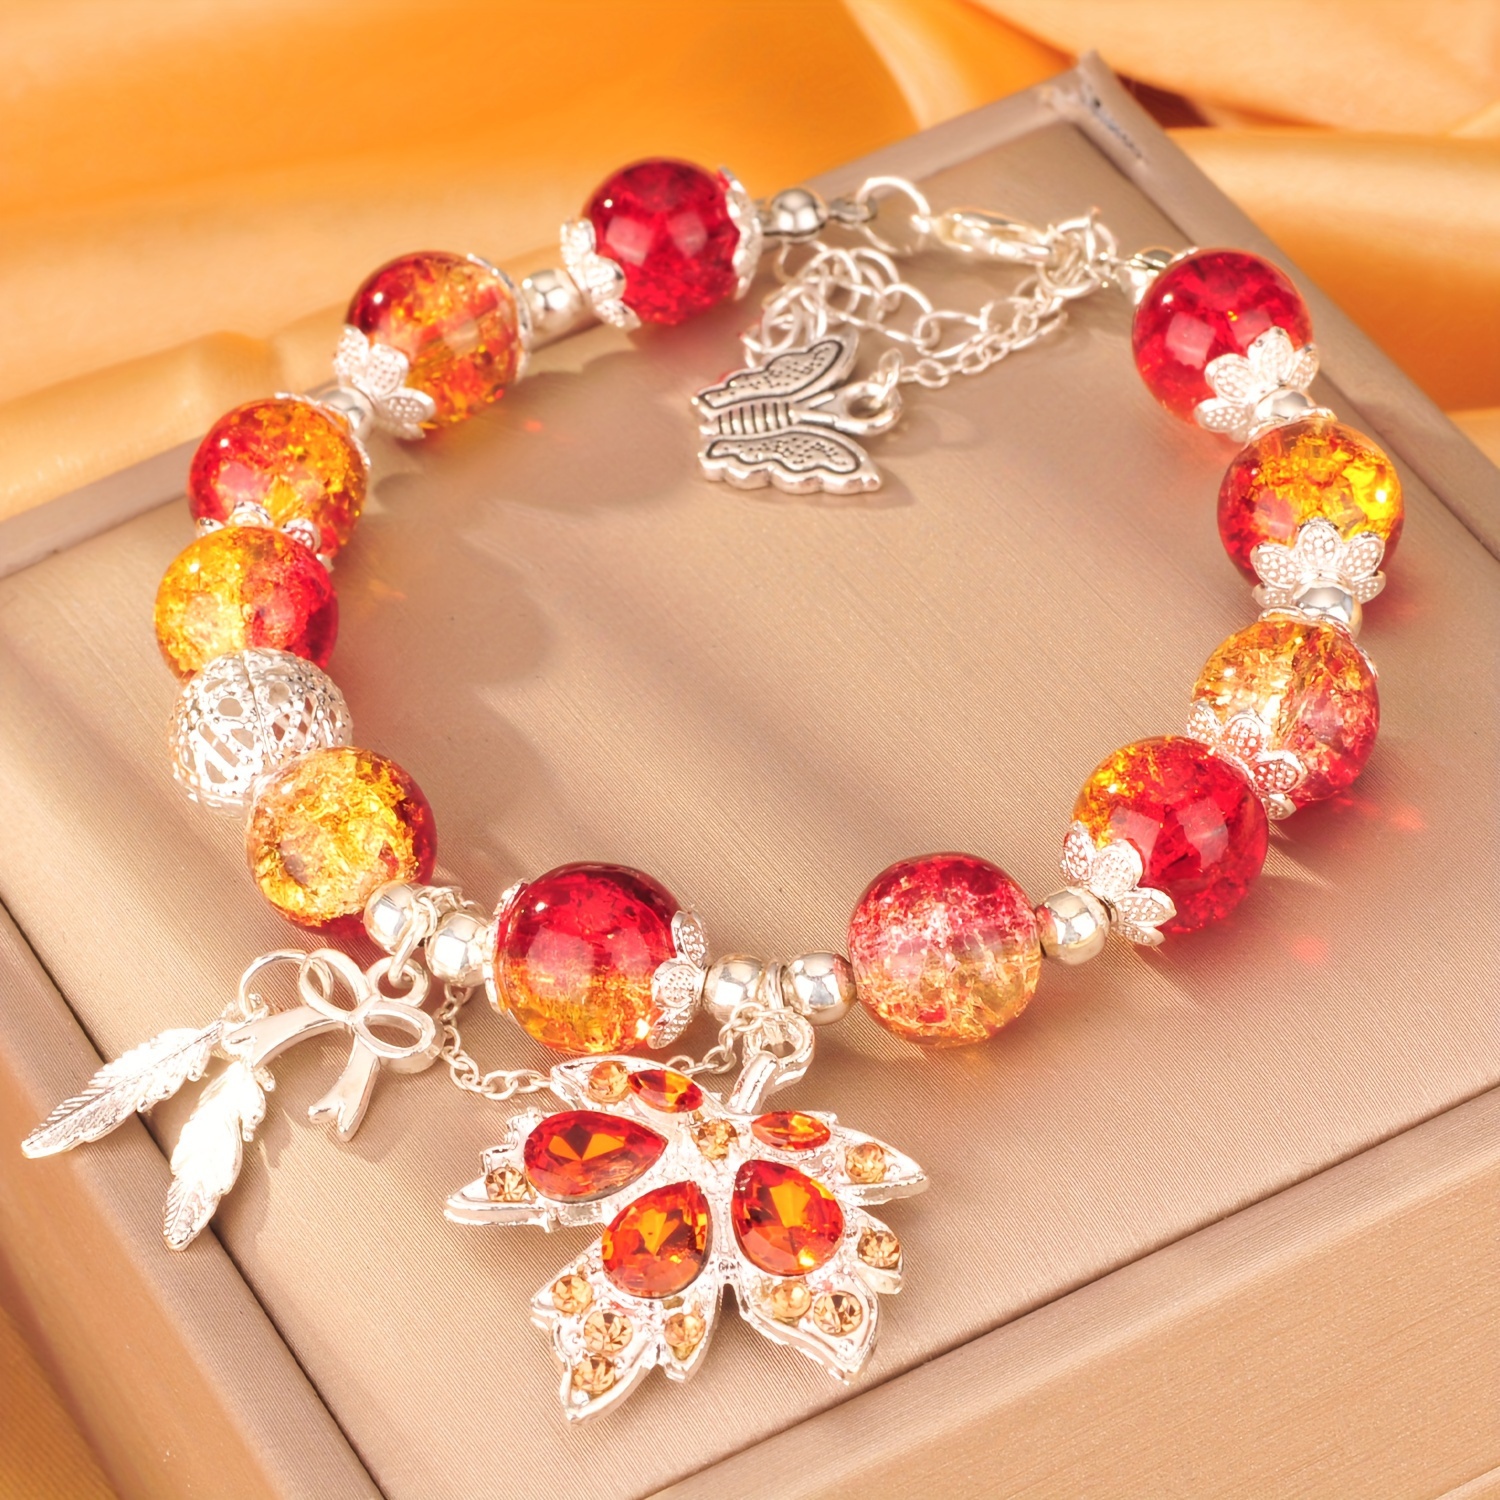 

Maple Leaf Charm Bracelet With Red & Yellow Gradient Glass Beads, Women's Elegant Beaded Jewelry Accessory, No Power Required